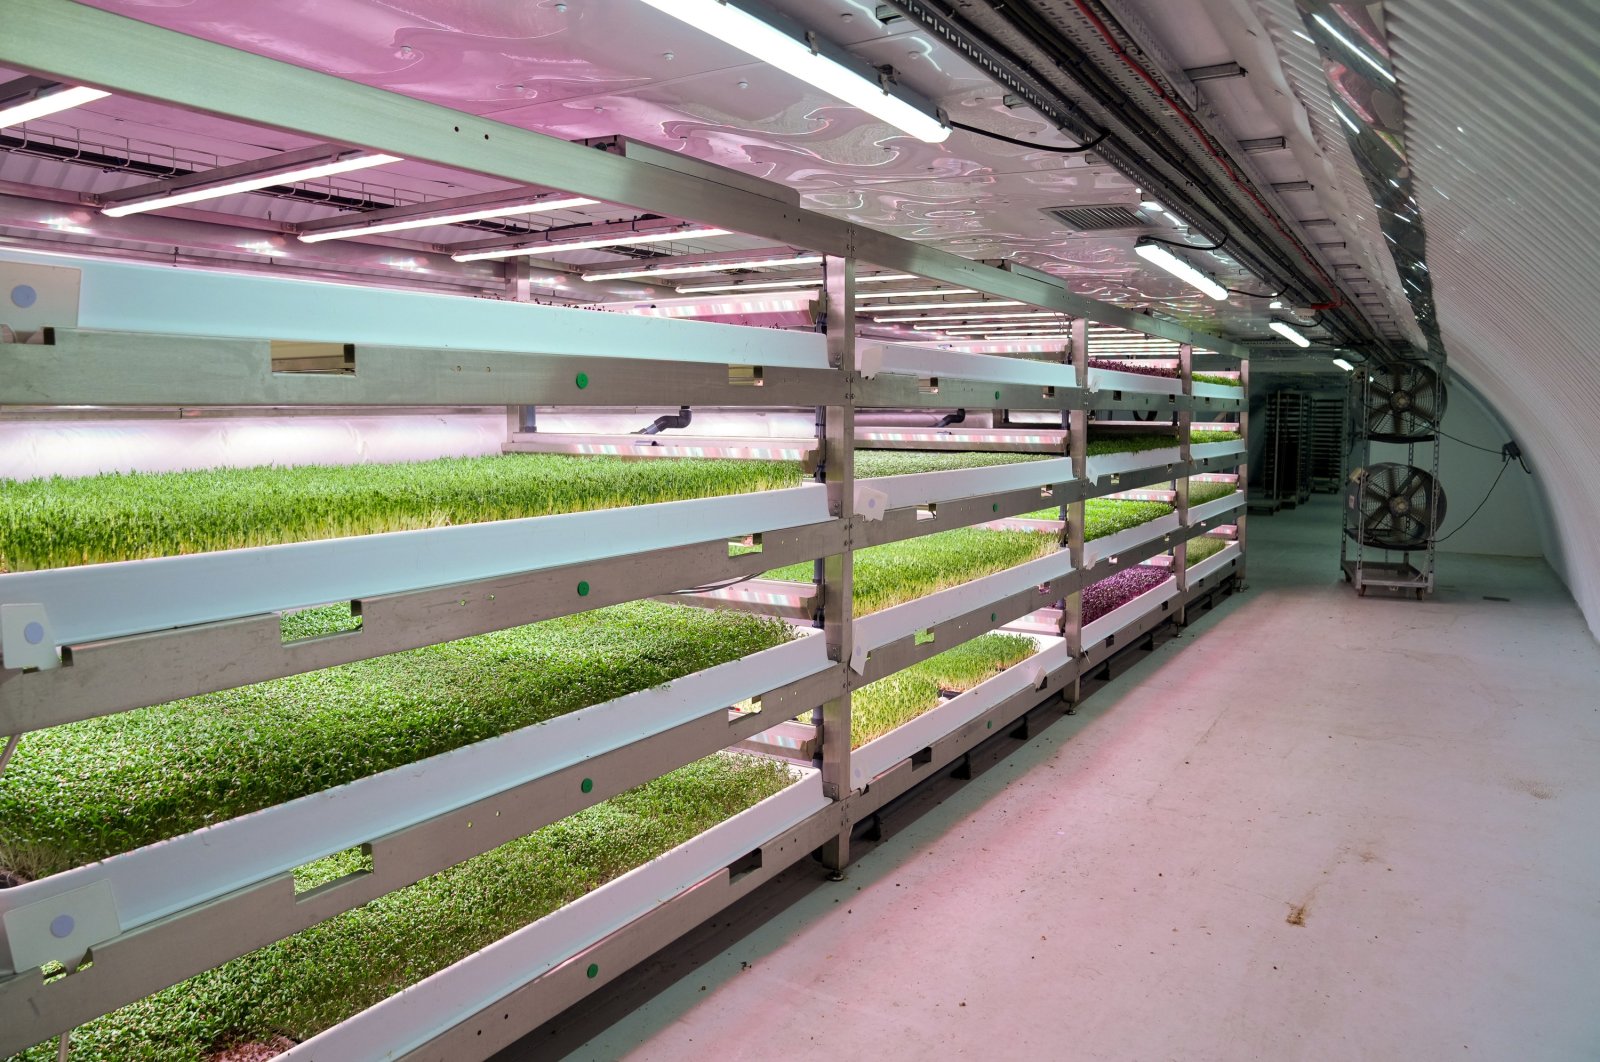 An underground farm that grows herbs and micro-greens in a disused World War II bunker using hydroponic technology and LED lighting powered by renewable energy, London, U.K., Nov. 24, 2022. (Reuters Photo)